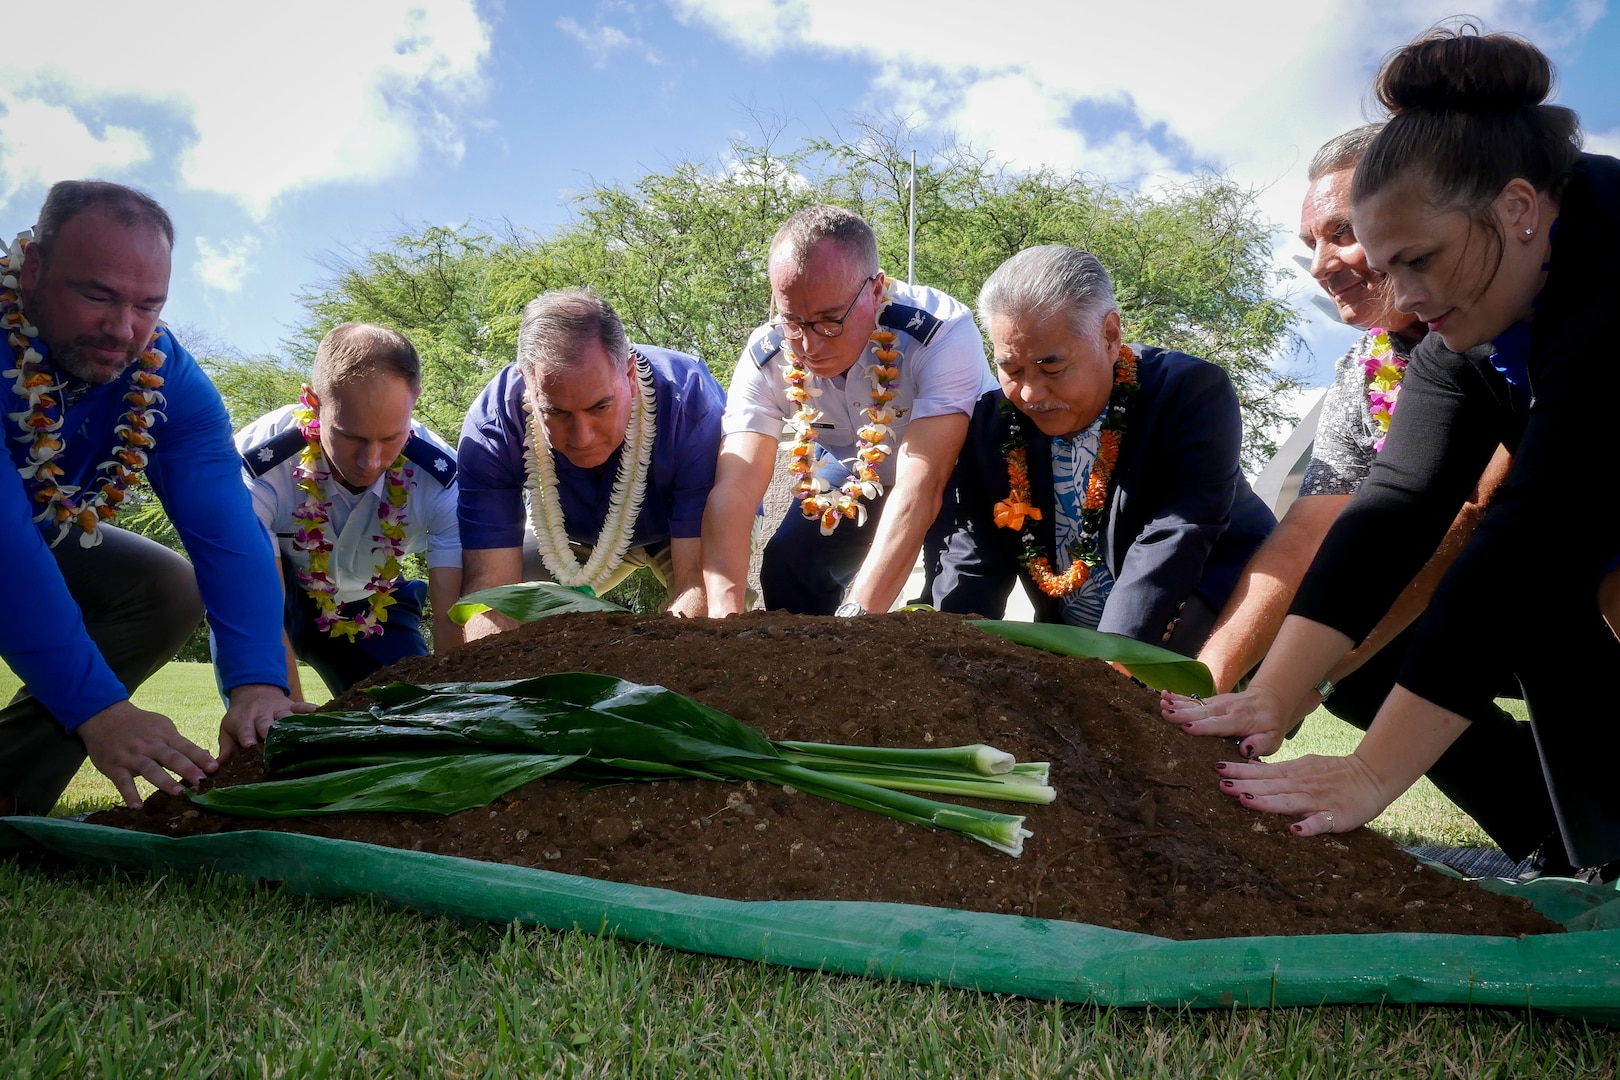 Representatives of the Pacific Energy Assurance Renewables Laboratory place their hands on a symbolic mound of earth during a blessing ceremony Dec. 17, 2019, at Joint Base Pearl Harbor-Hickam, Hawaii. The ceremony honored a microgrid project designed to provide new layers of energy assurance and self-sustaining power sources to the 154th Wing.